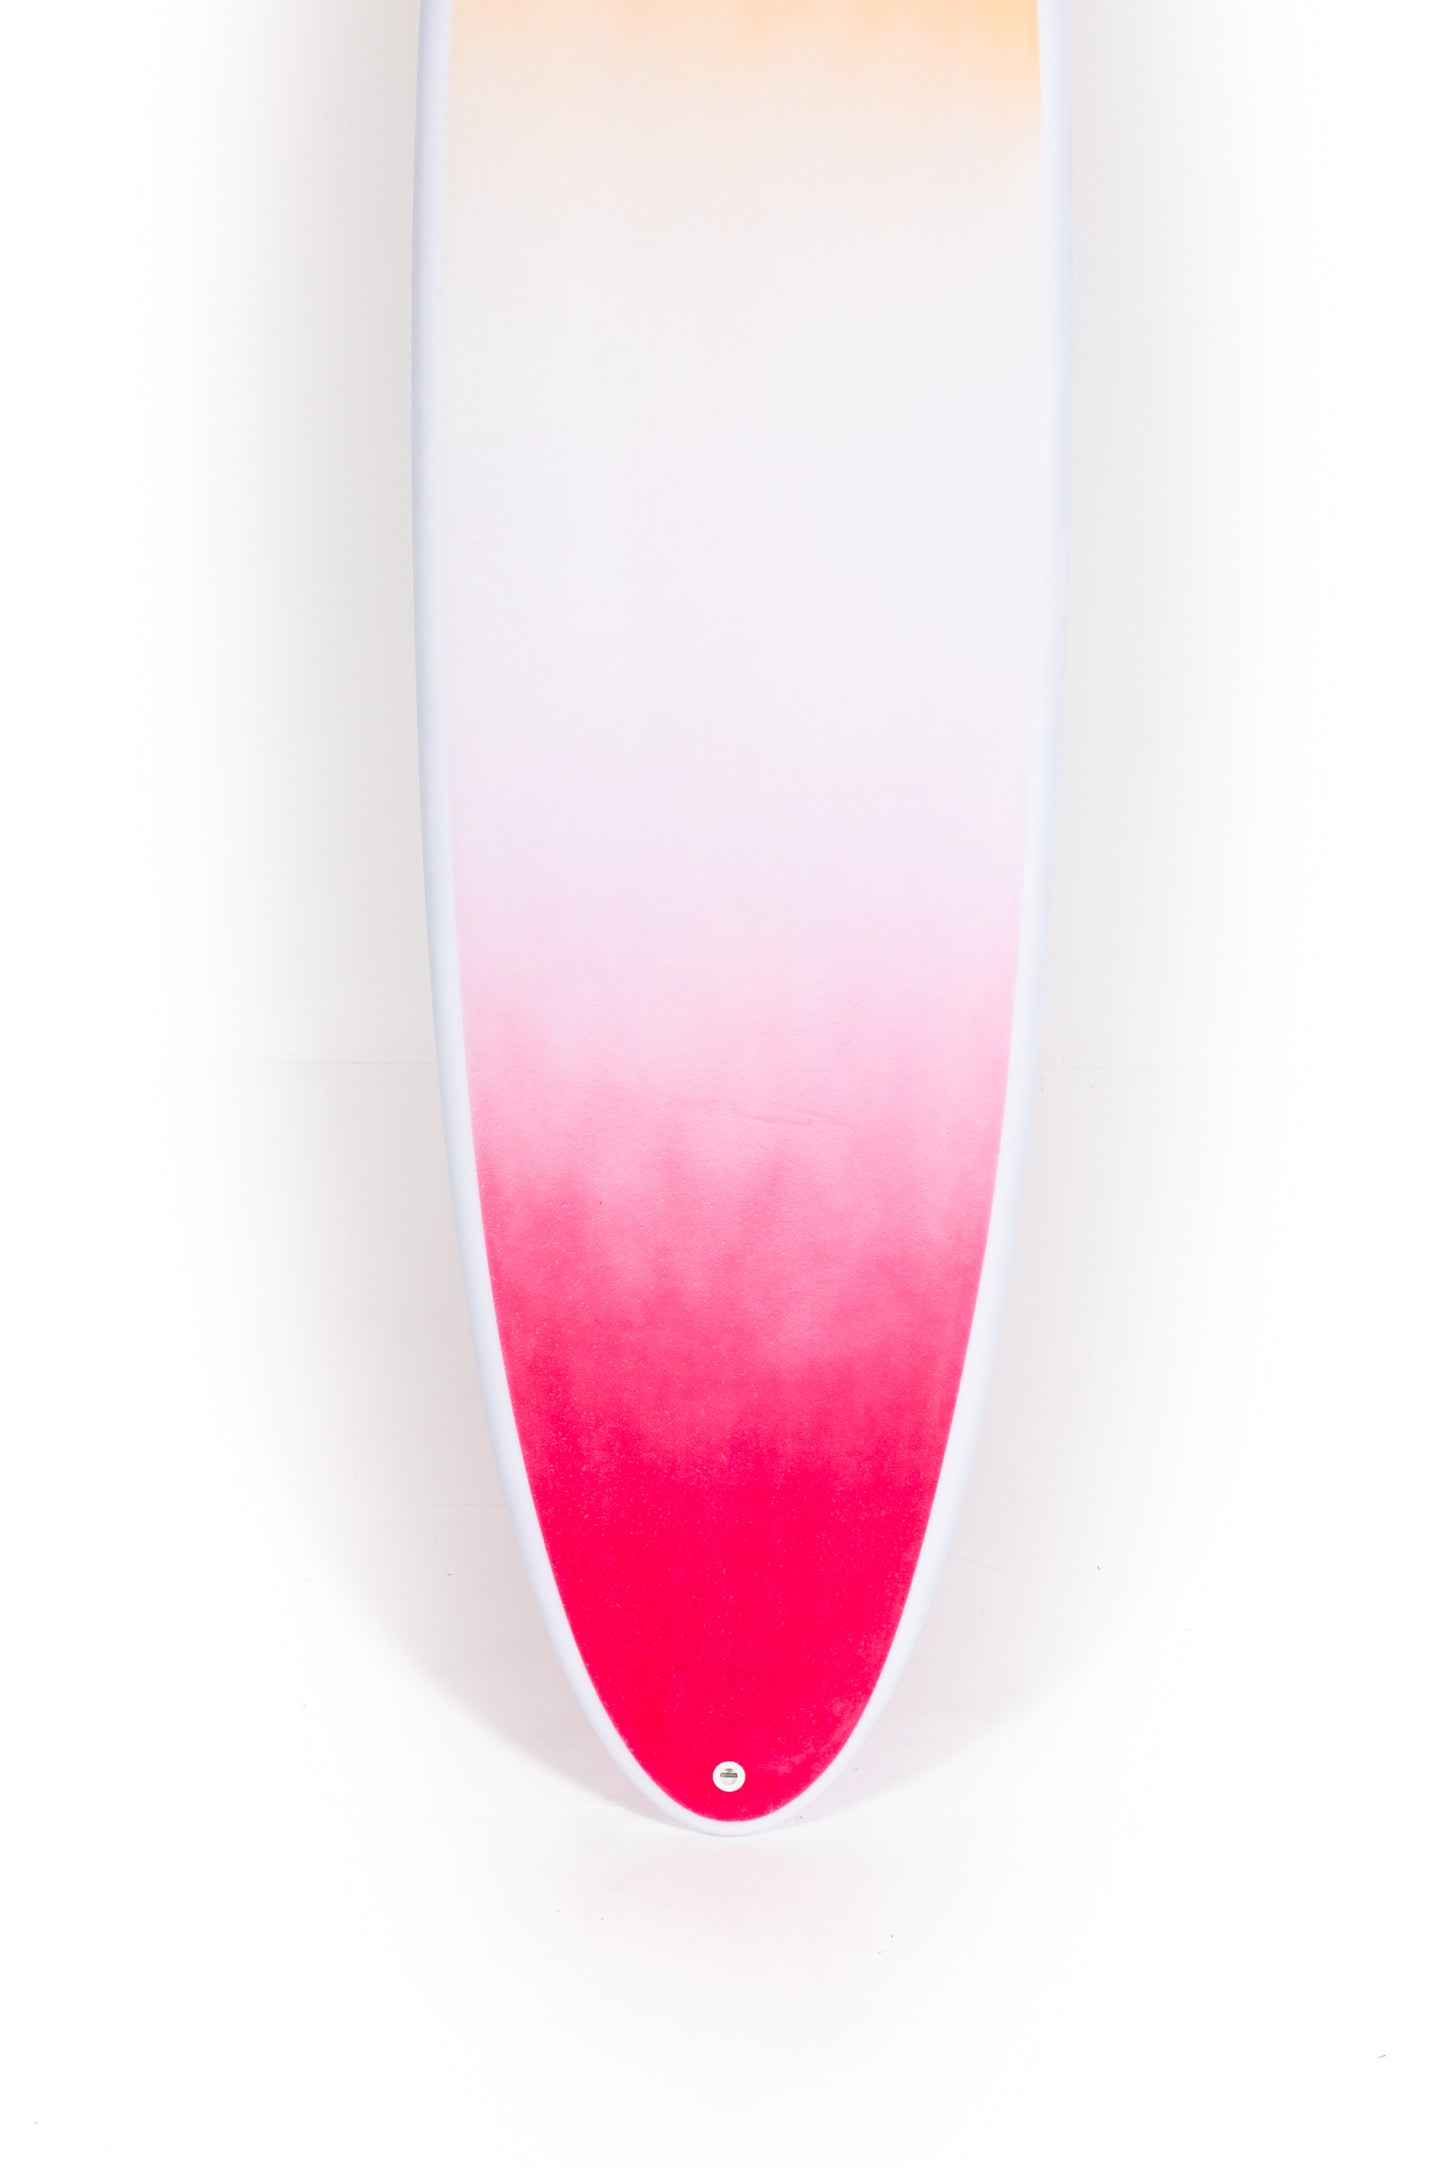 
                  
                    Pukas Surf Shop - Indio Surfboards - THE EGG Space - 7'6" x 22 x 2 7/8 - 55,98L - TB - INECEG0706SPA
                  
                